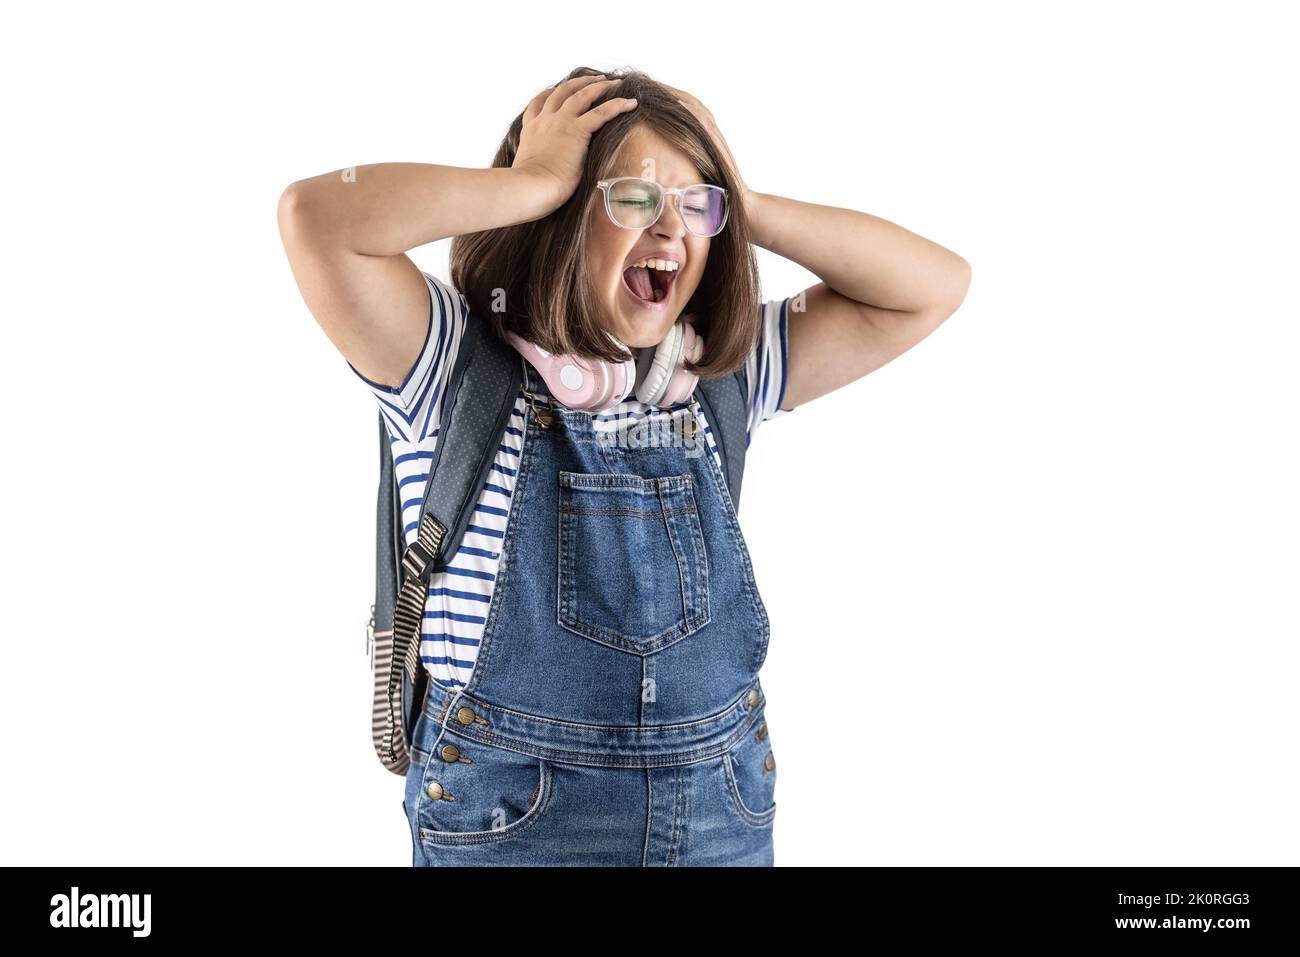 Schoolgirl with backpack and glasses holds her with both hands screaming out loud. Stock Photo